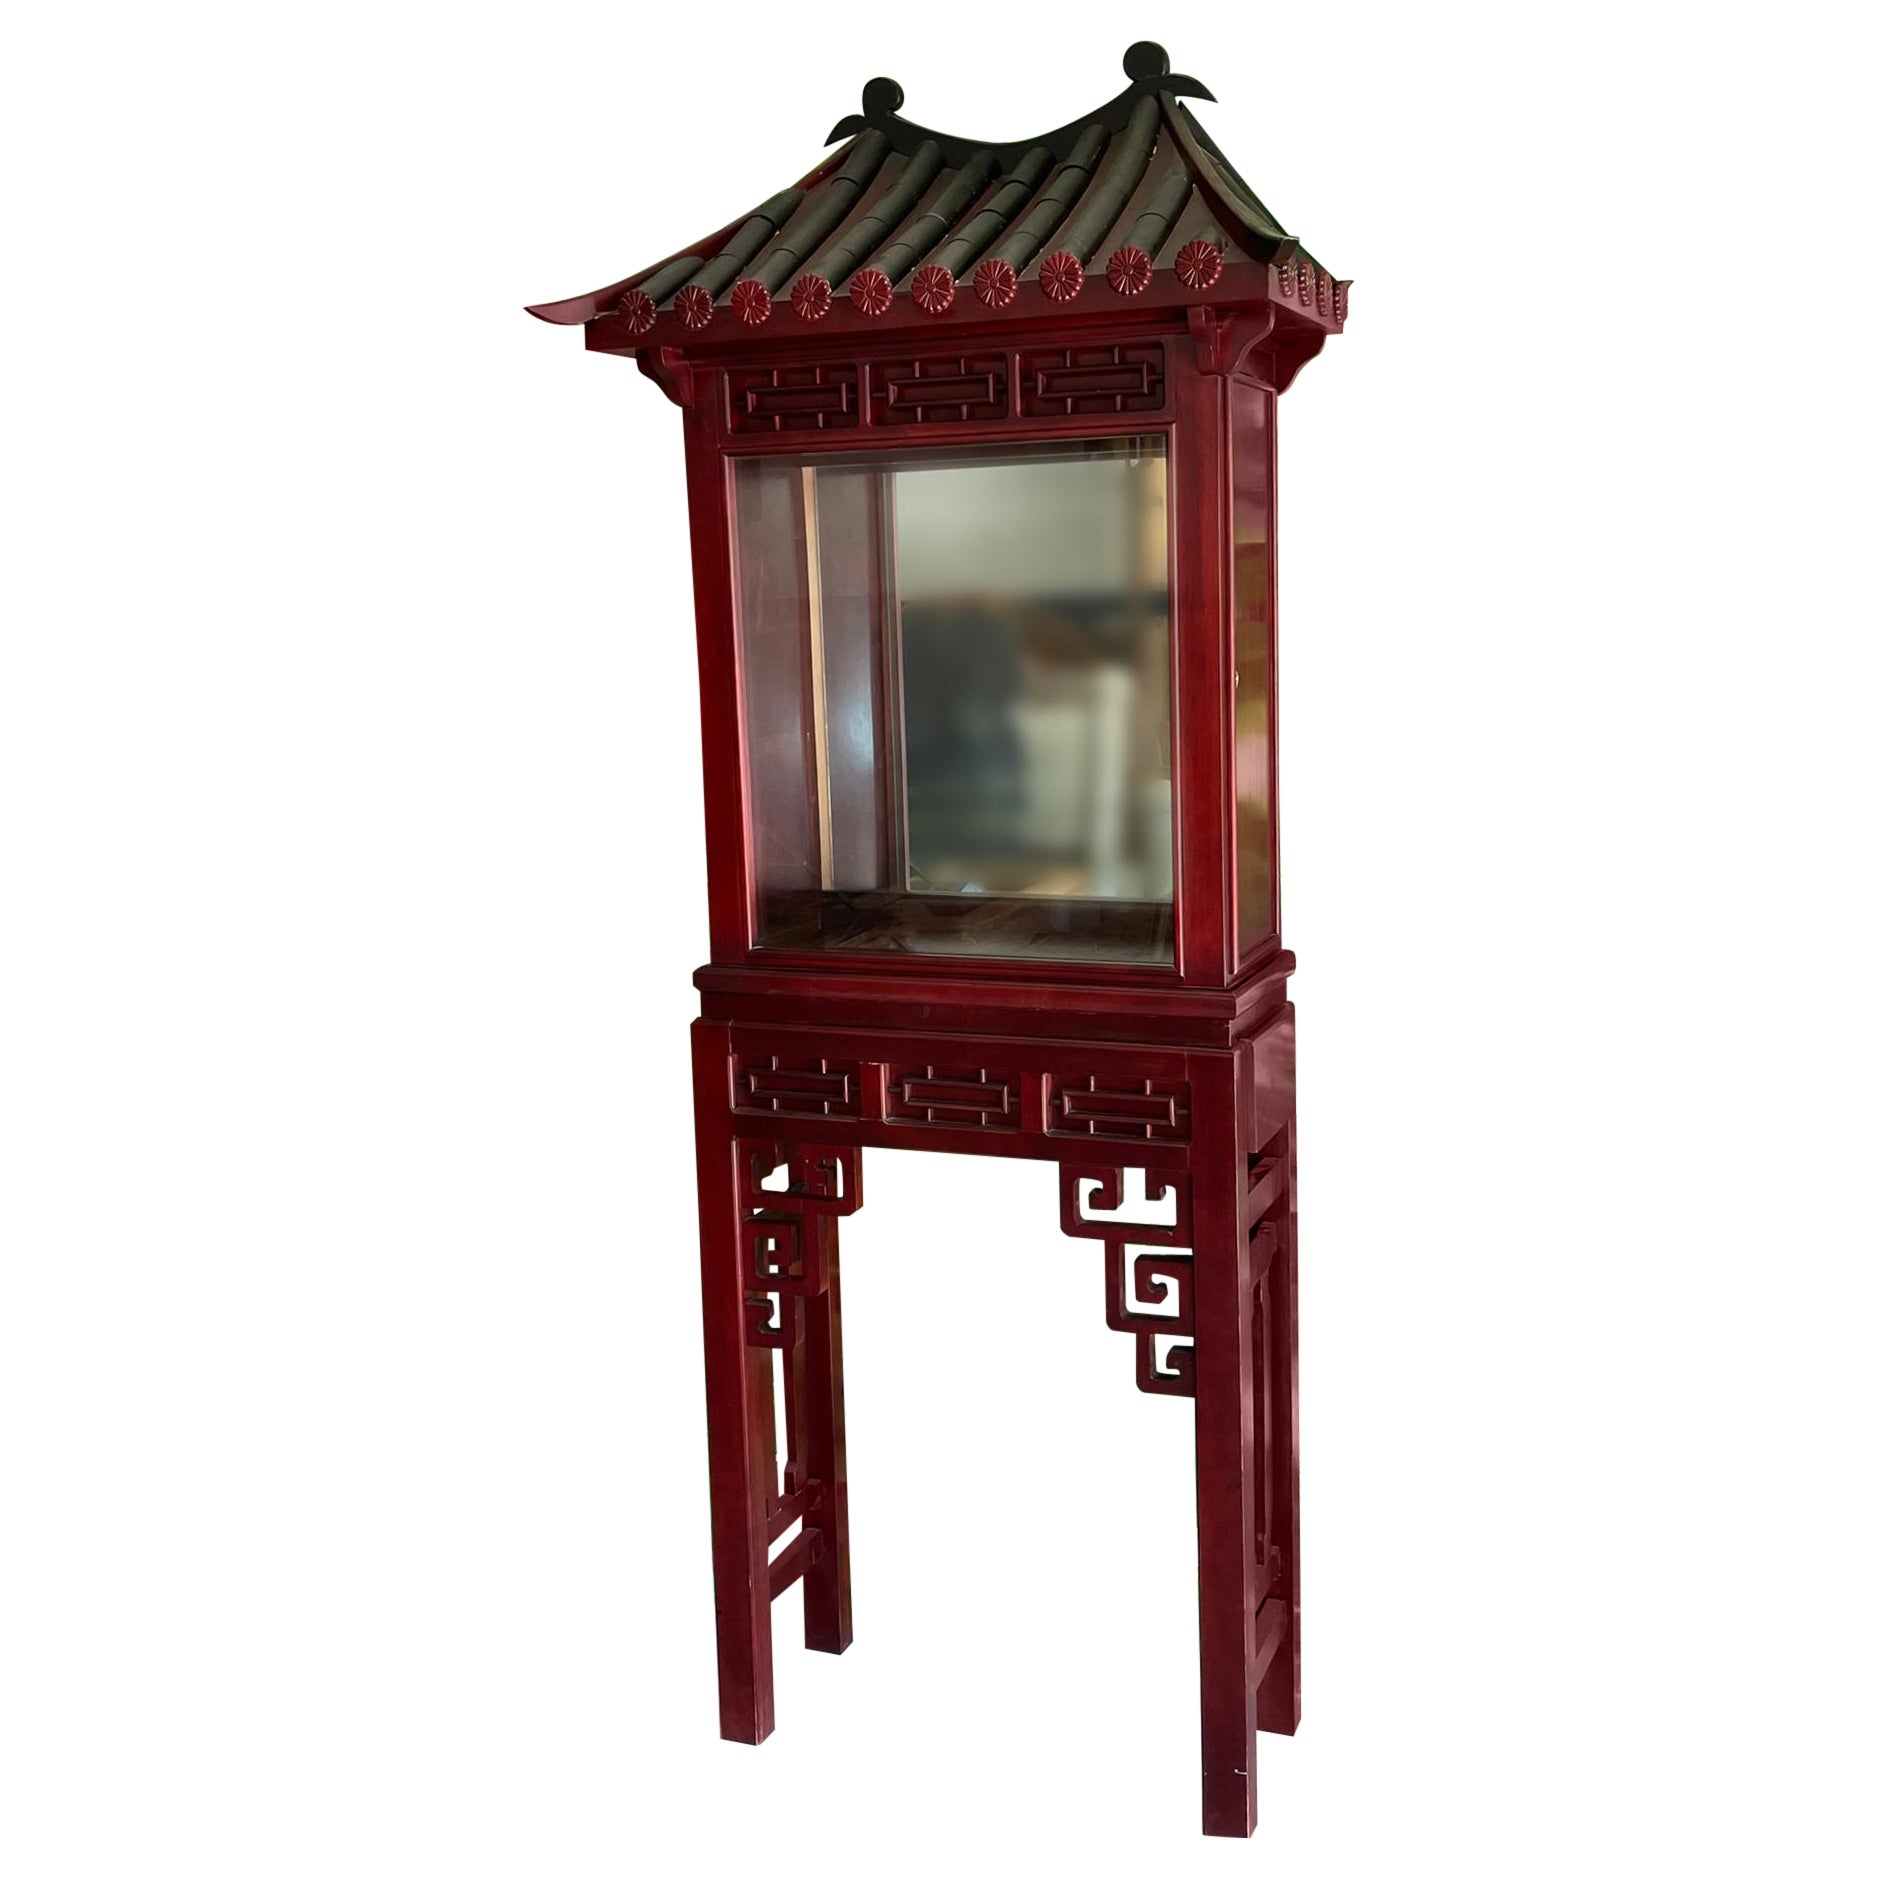 Vitrine pagode asiatique de style chinoiseries